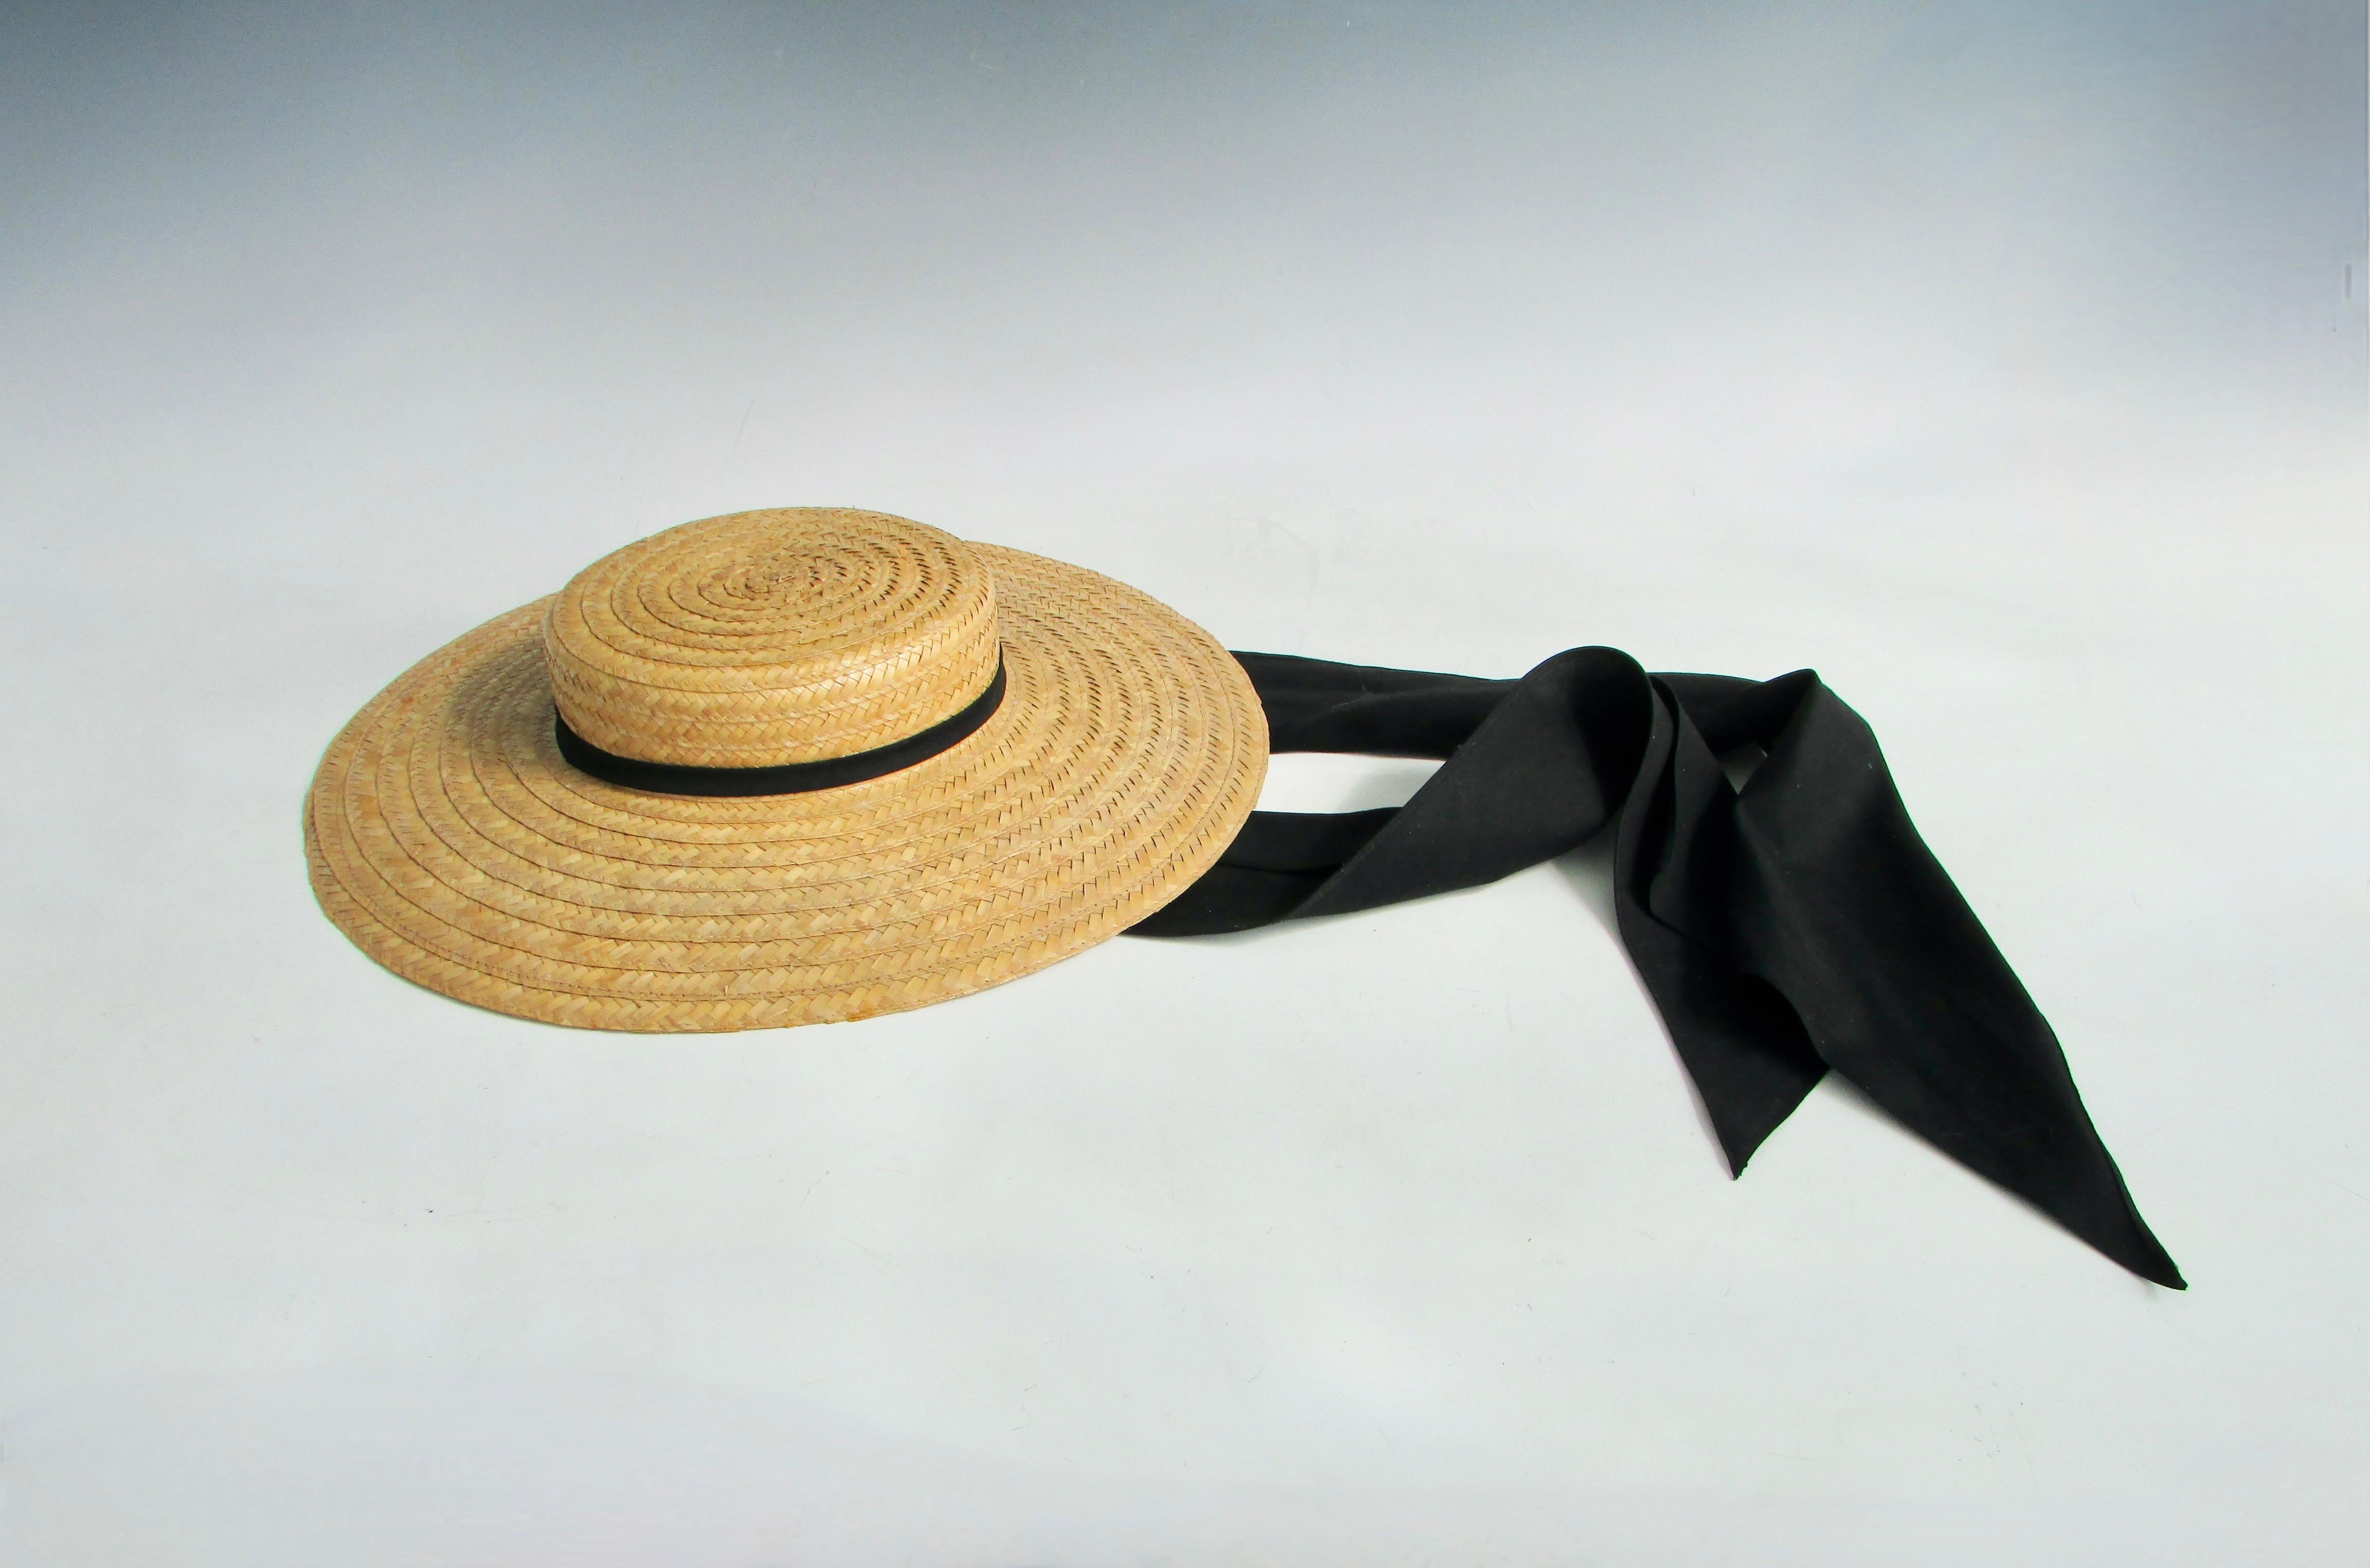 Fine condition probably never worn. Ladies or girls straw hat with black ribbon band and chin tie. Size of opening 6